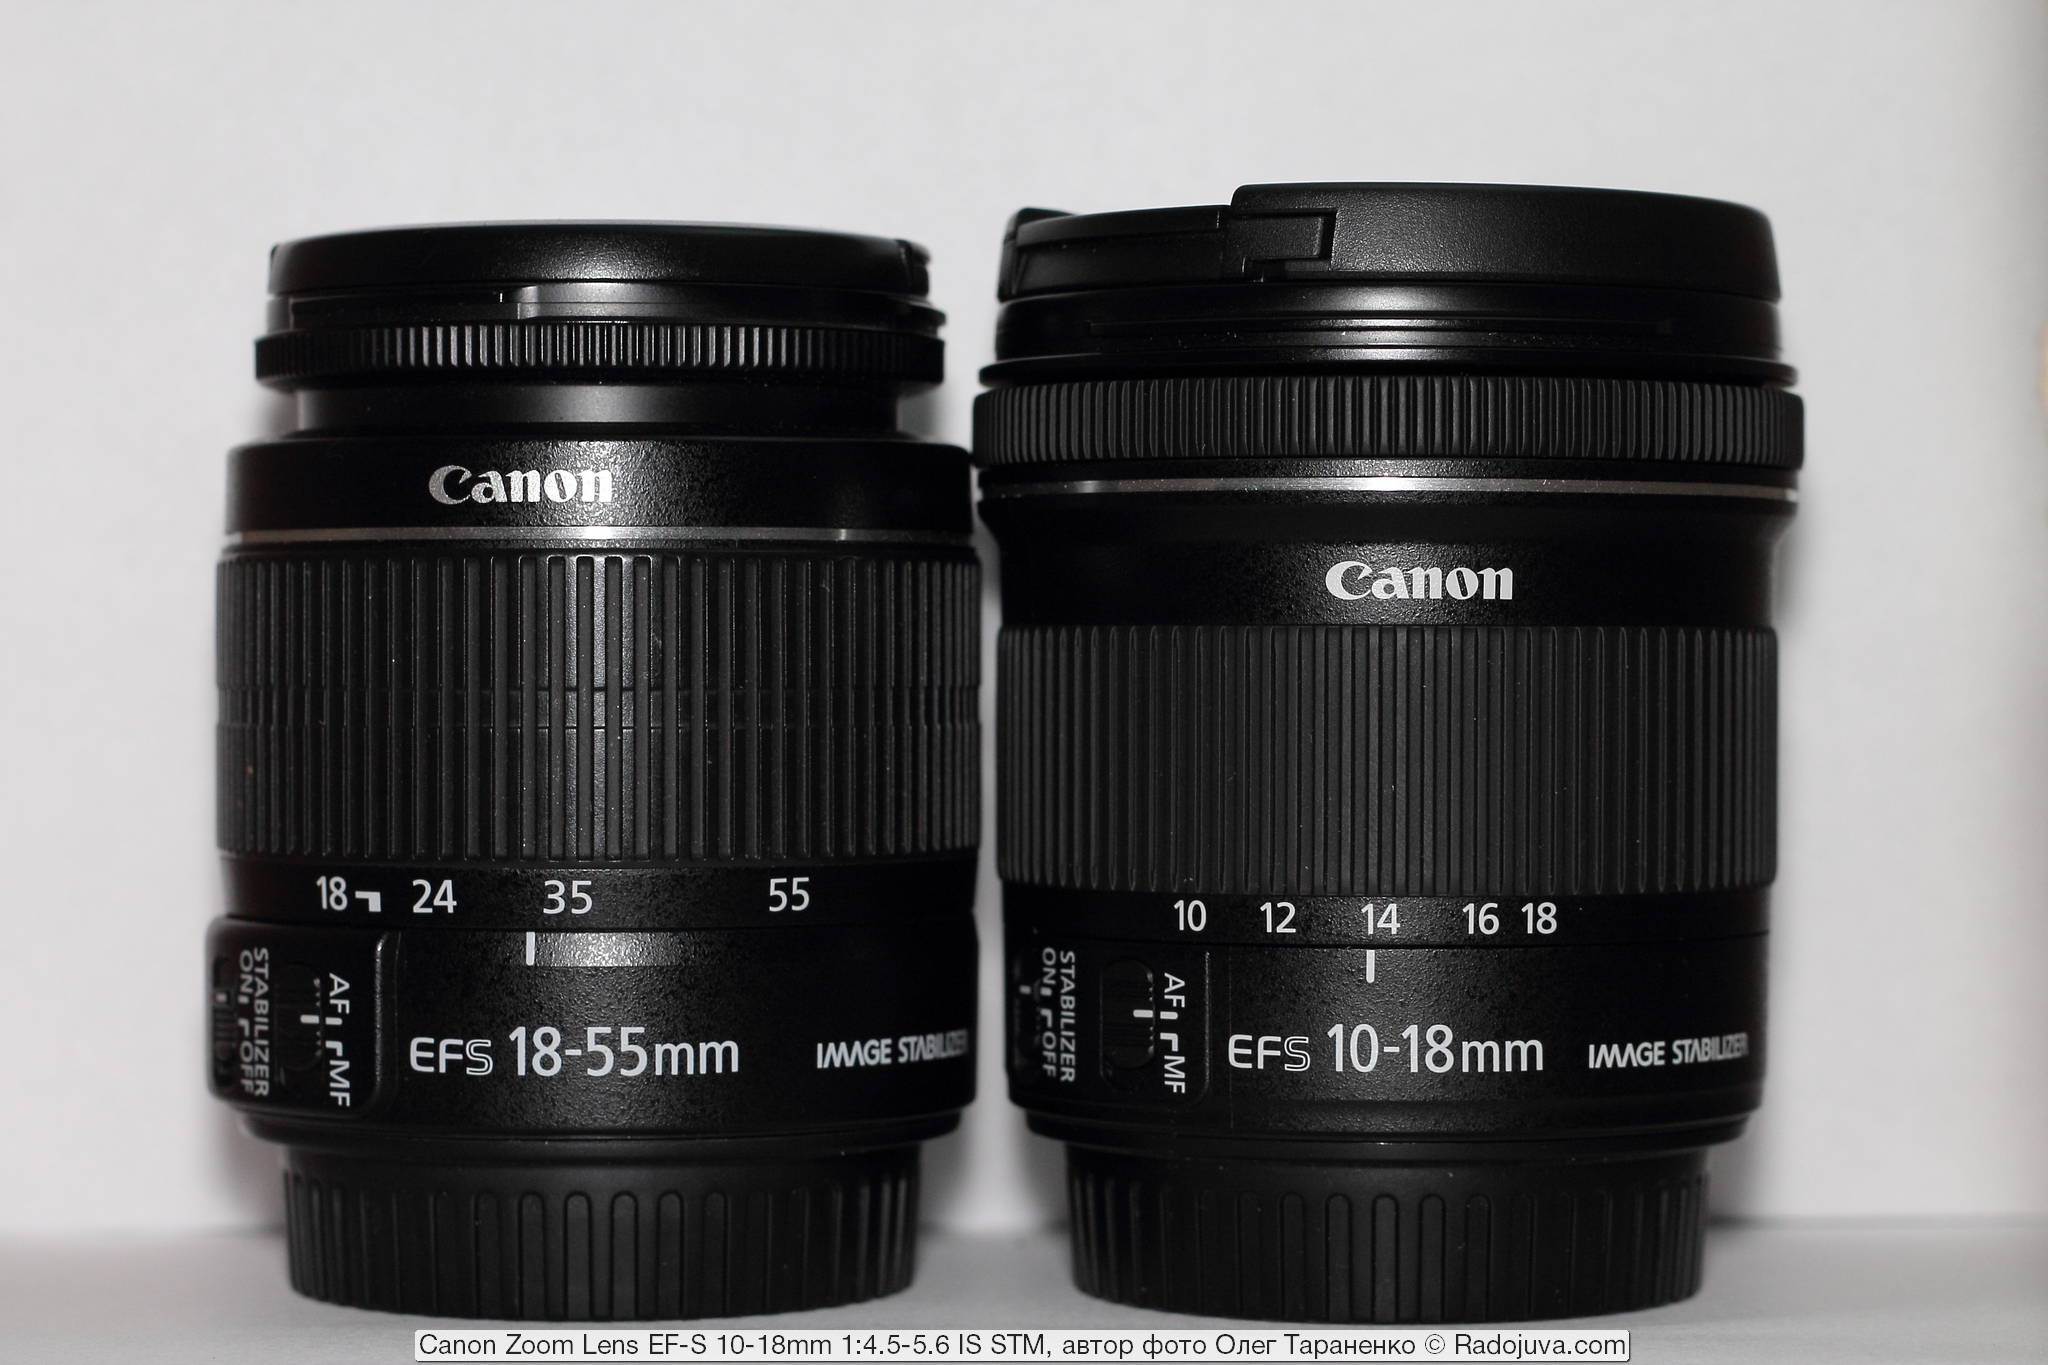 Canon Zoomlens EF-S 10-18mm 1:4.5-5.6 IS STM